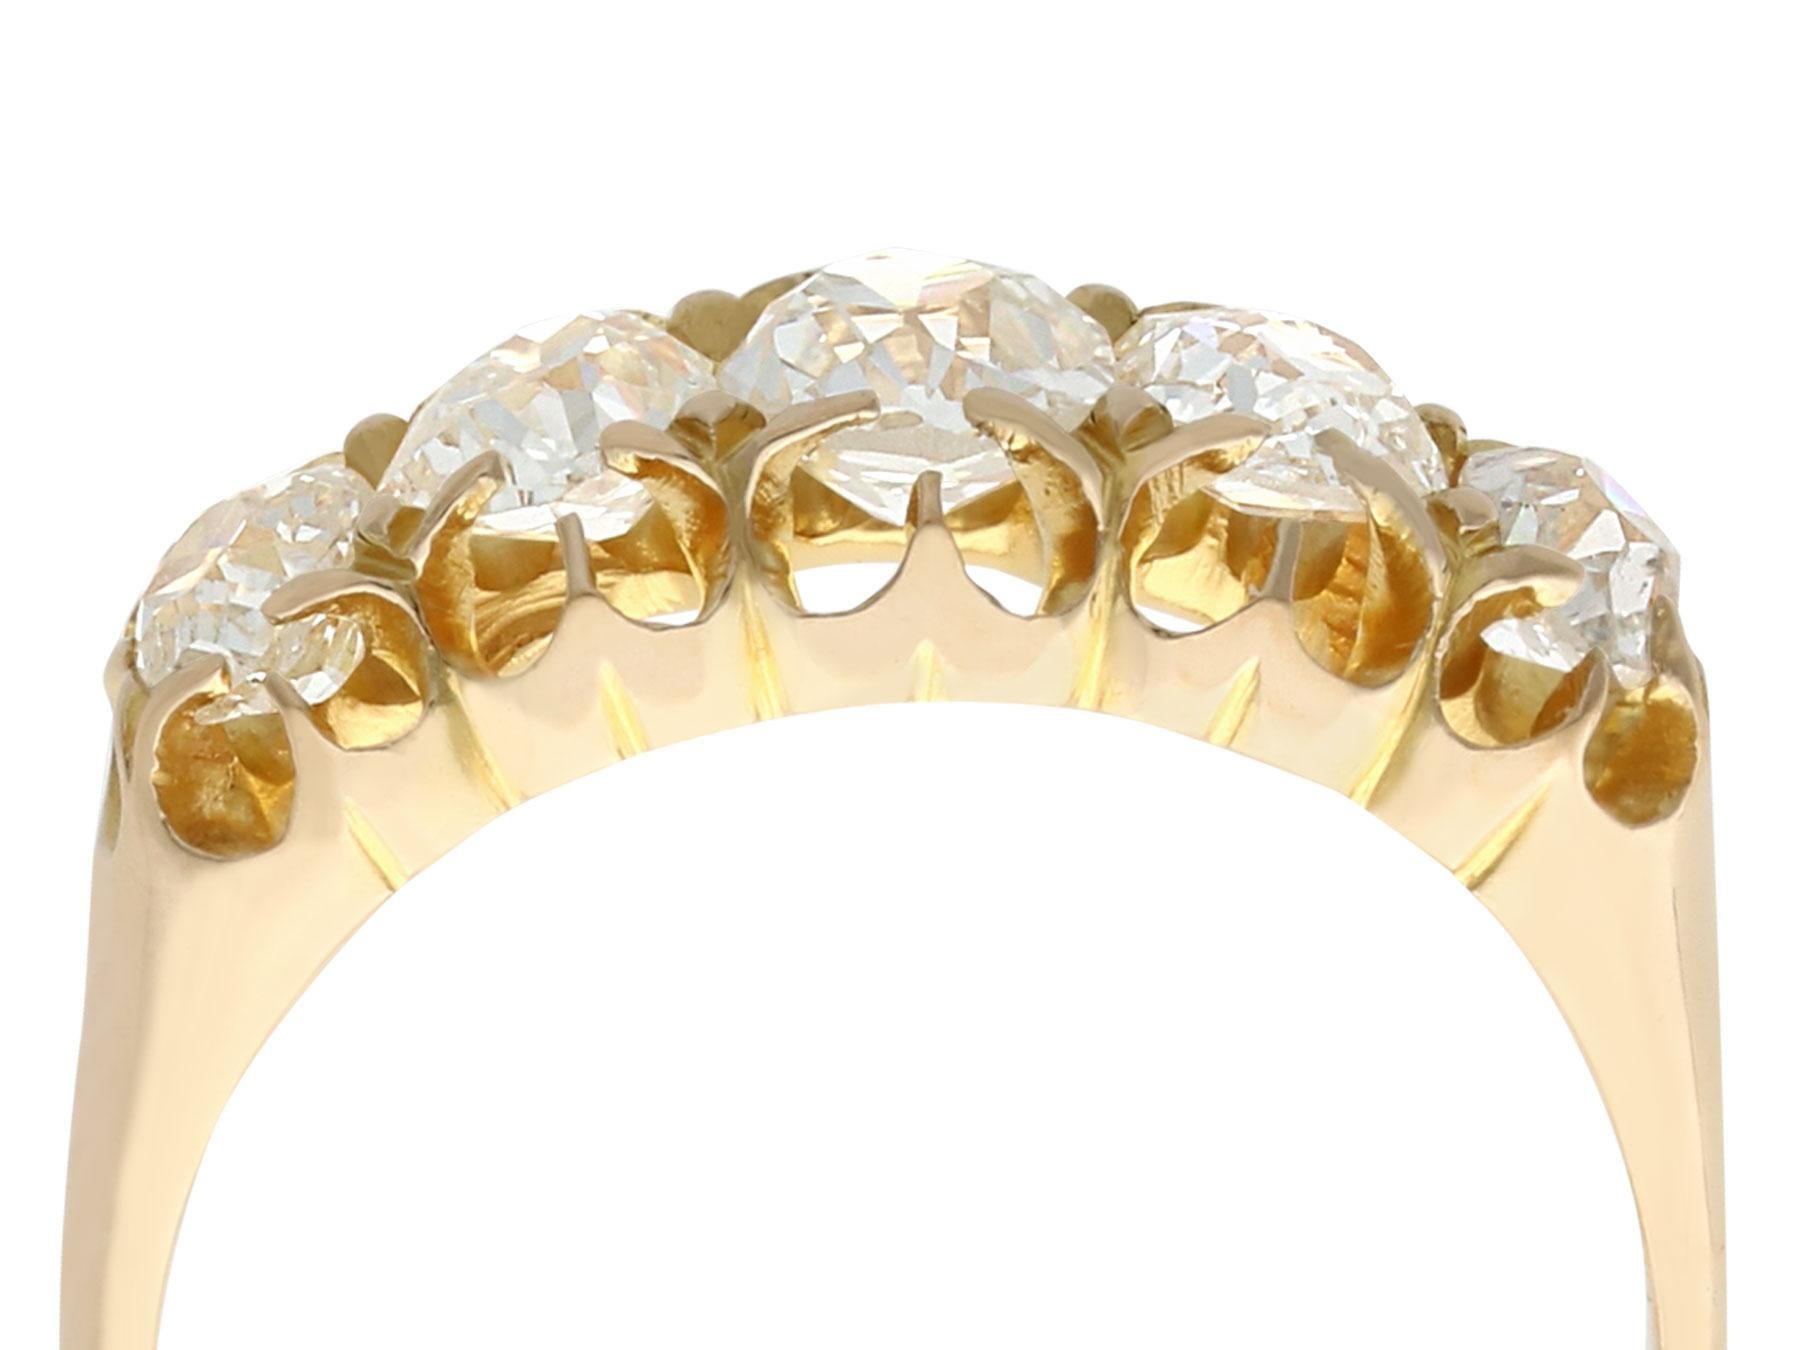 An impressive antique Victorian 1.51 carat diamond and 18 karat yellow gold five stone dress ring; part of our diverse antique jewelry and estate jewelry collections.

This stunning, fine and impressive five stone diamond ring has been crafted in